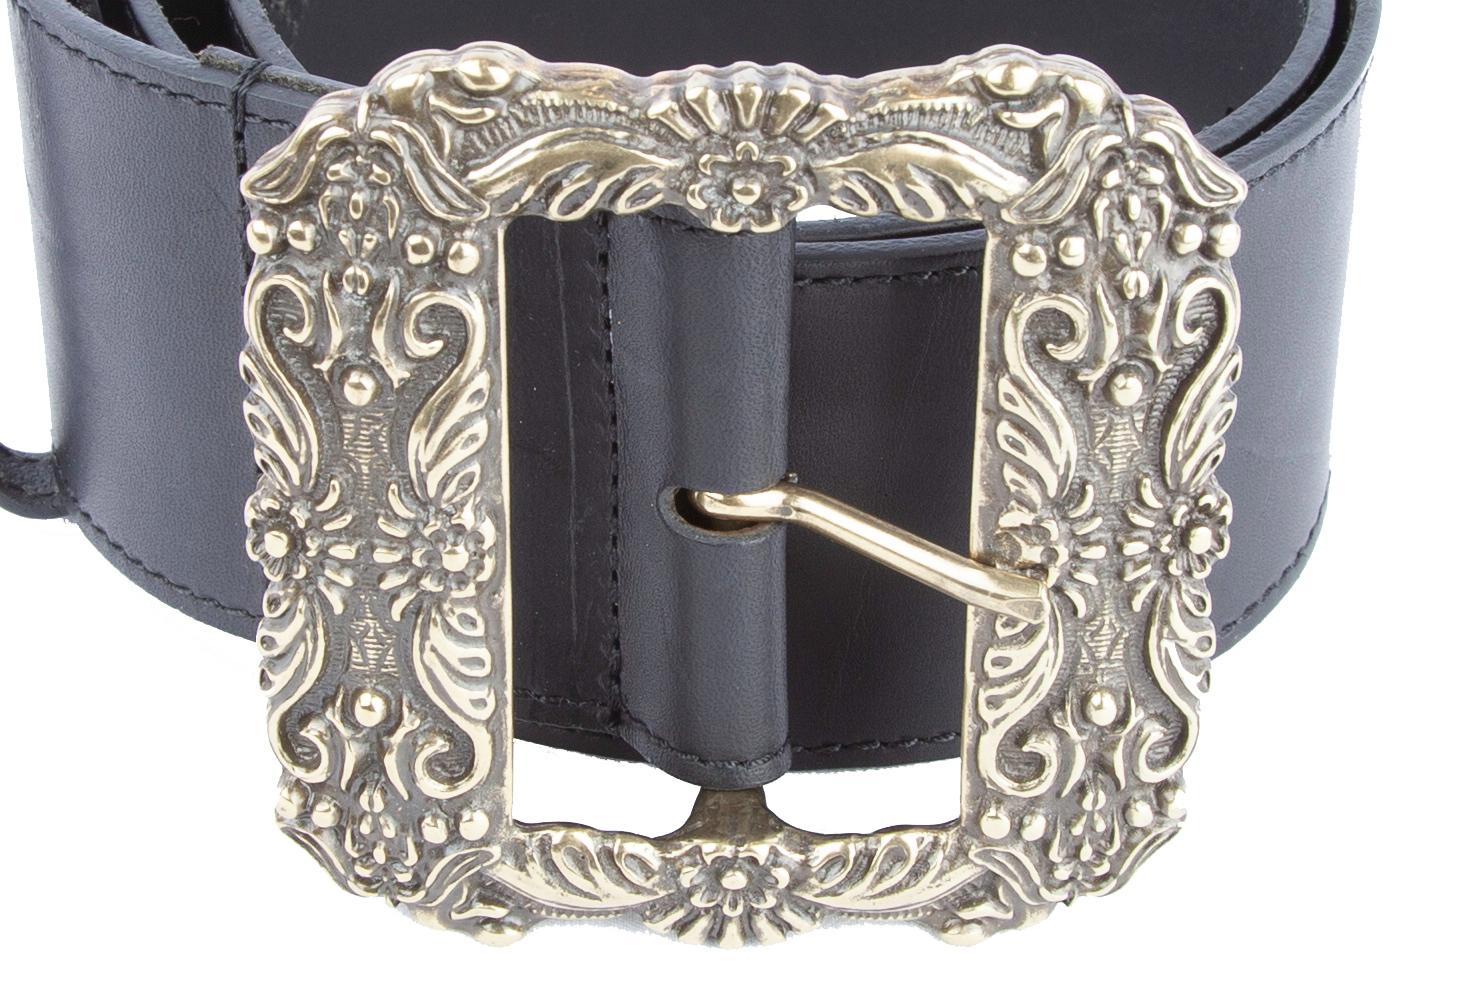 Etro Fall 2019 Runway black leather belt with large metal buckle. New item, never owned or worn, however it was on display in our boutique, which lead to a few minor scratches. Made in Italy.

Size Available: 75

Material: Calf Leather 100%, Metal